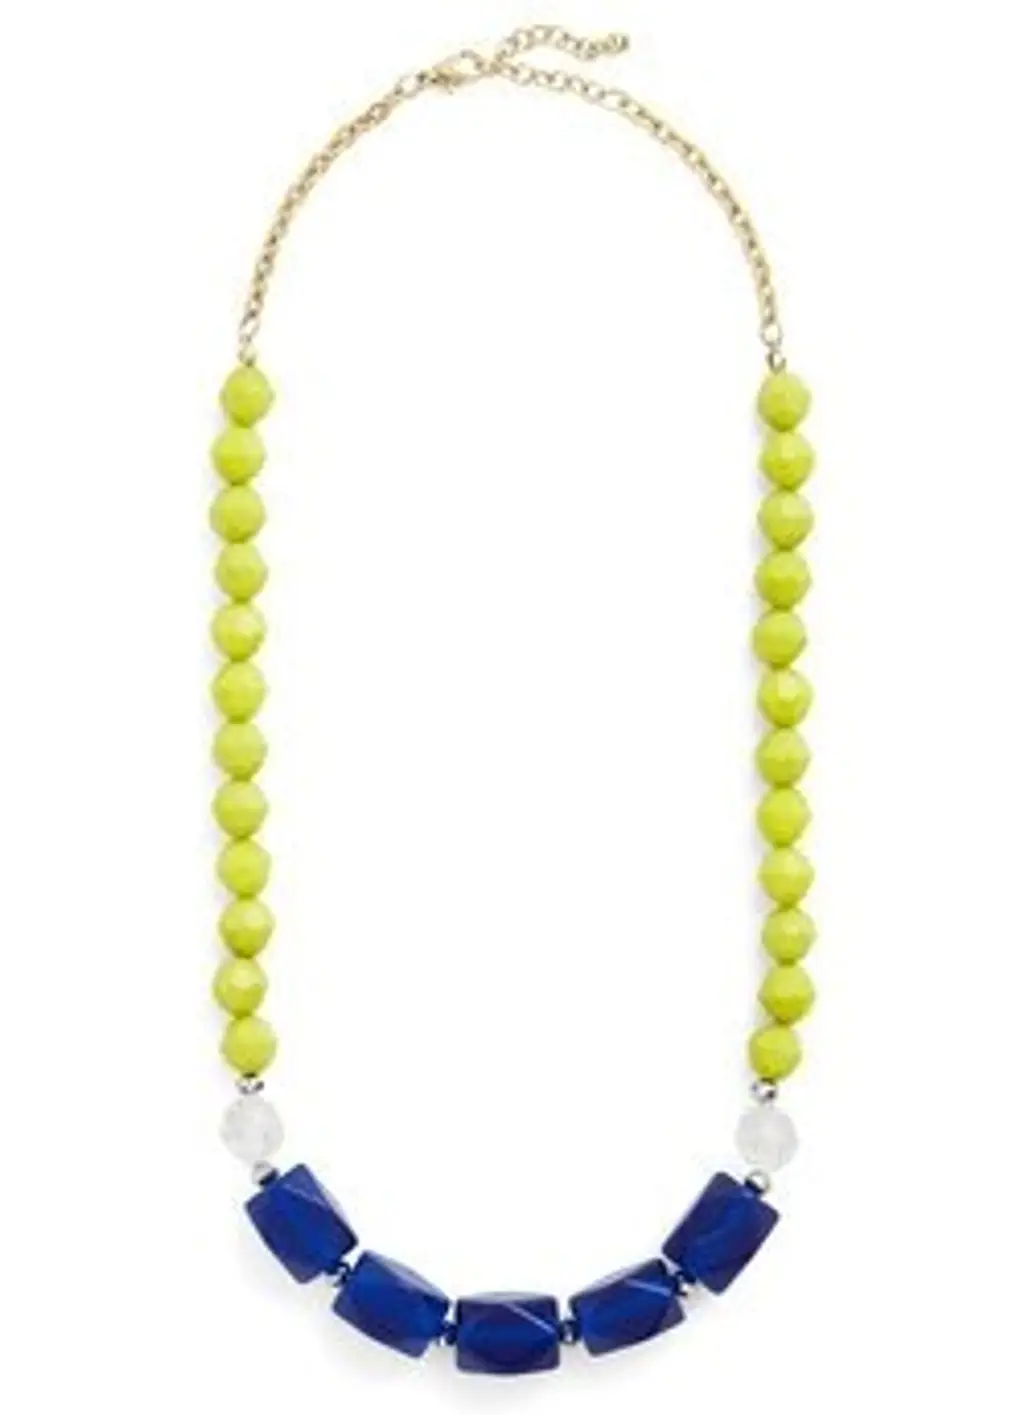 Here at the Cobalt Cabana Necklace